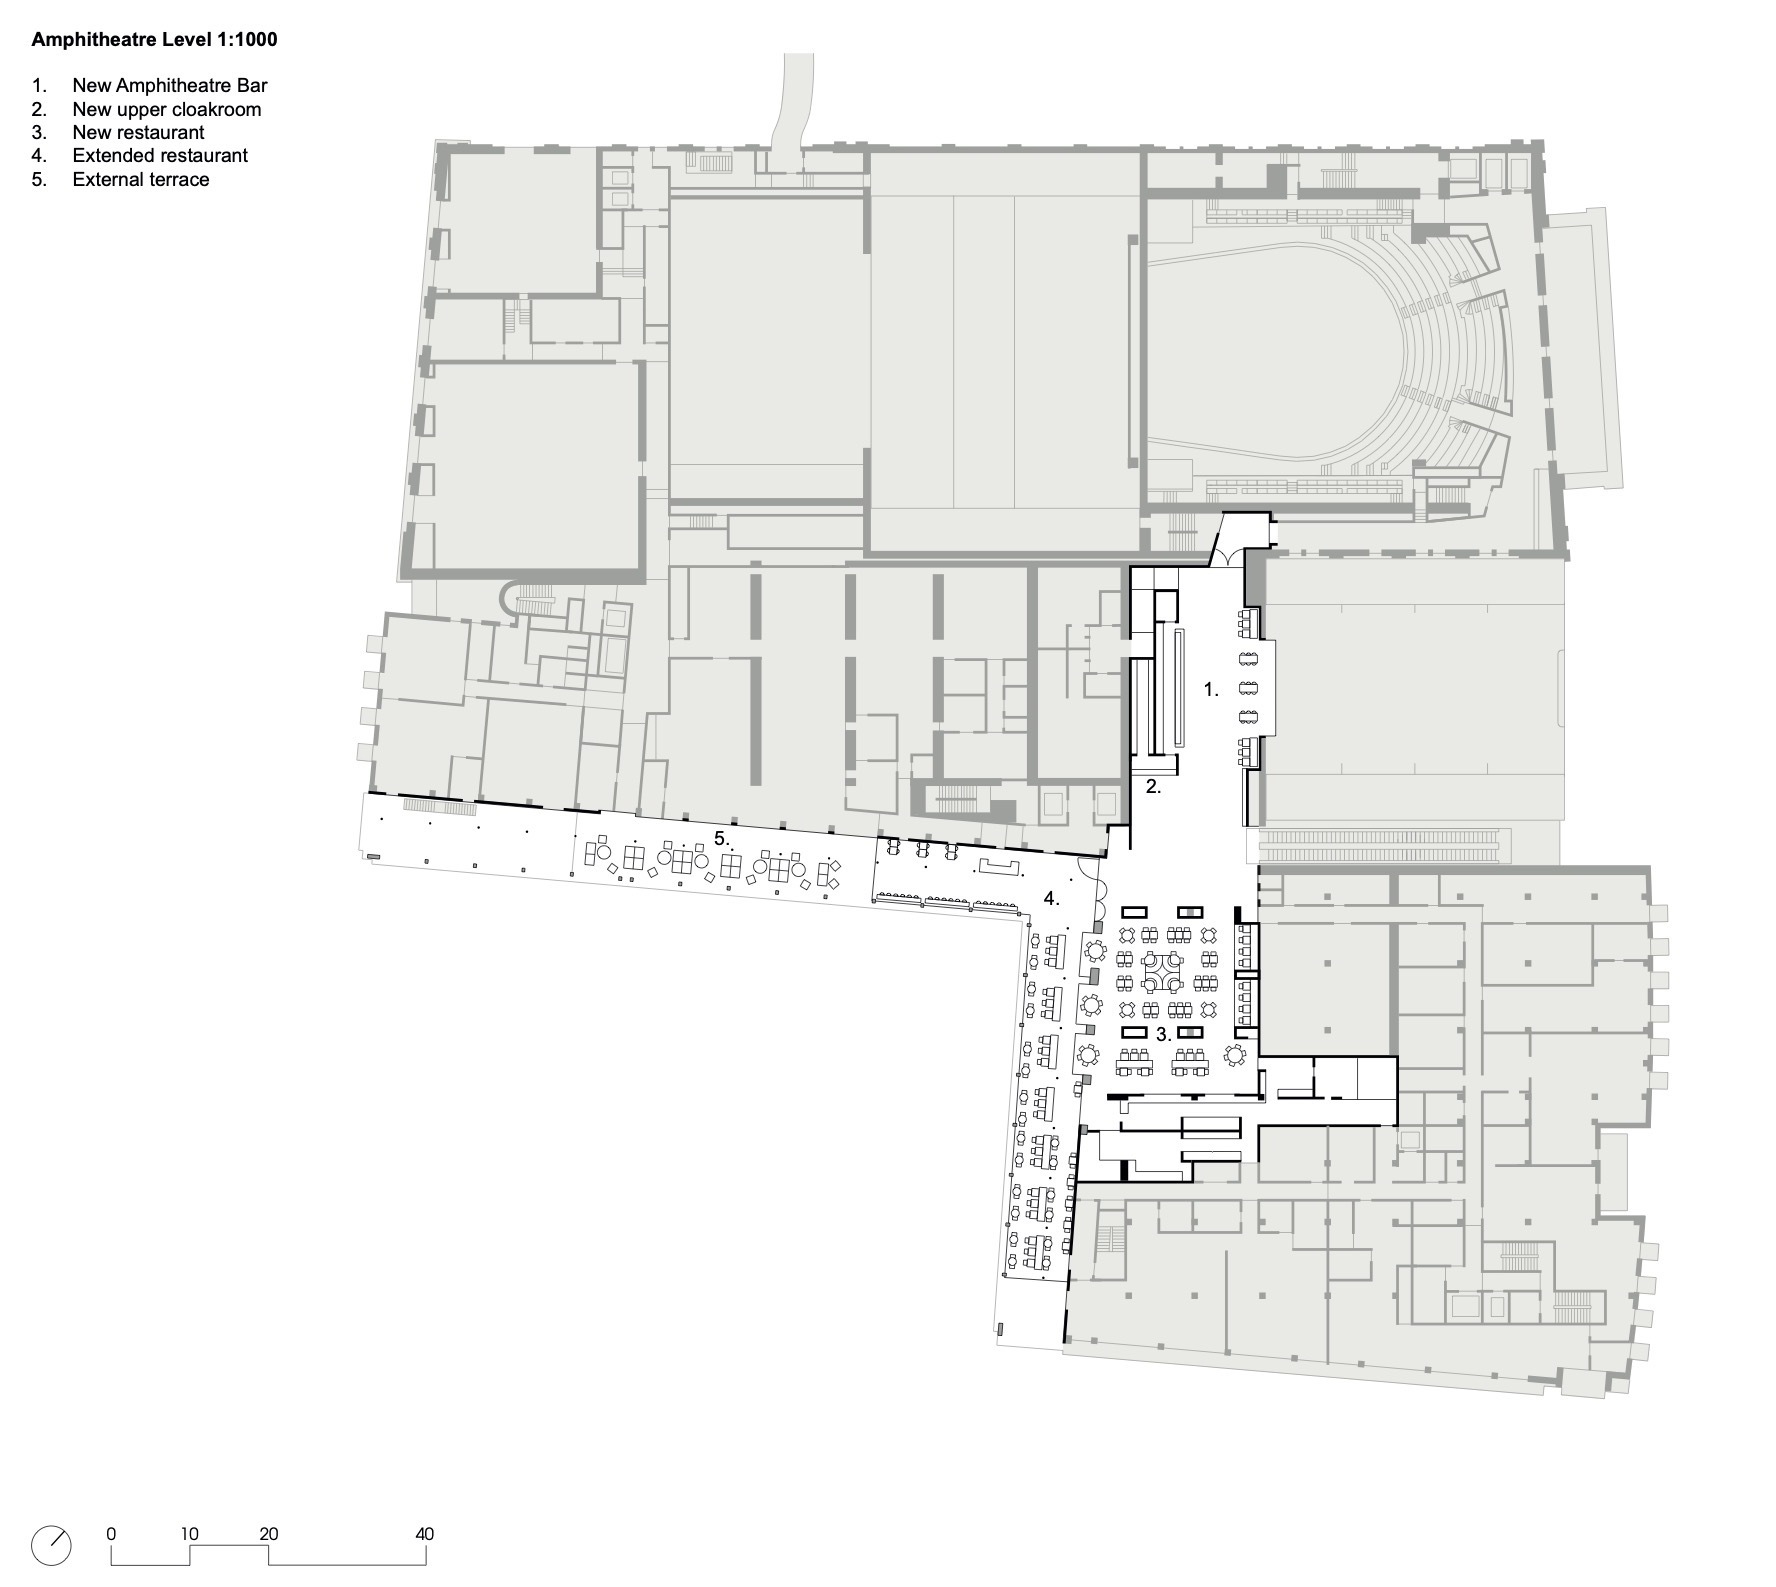 28_SW_ROH_Plan_LevelAmphitheatre_1to1000_Annotated.jpg